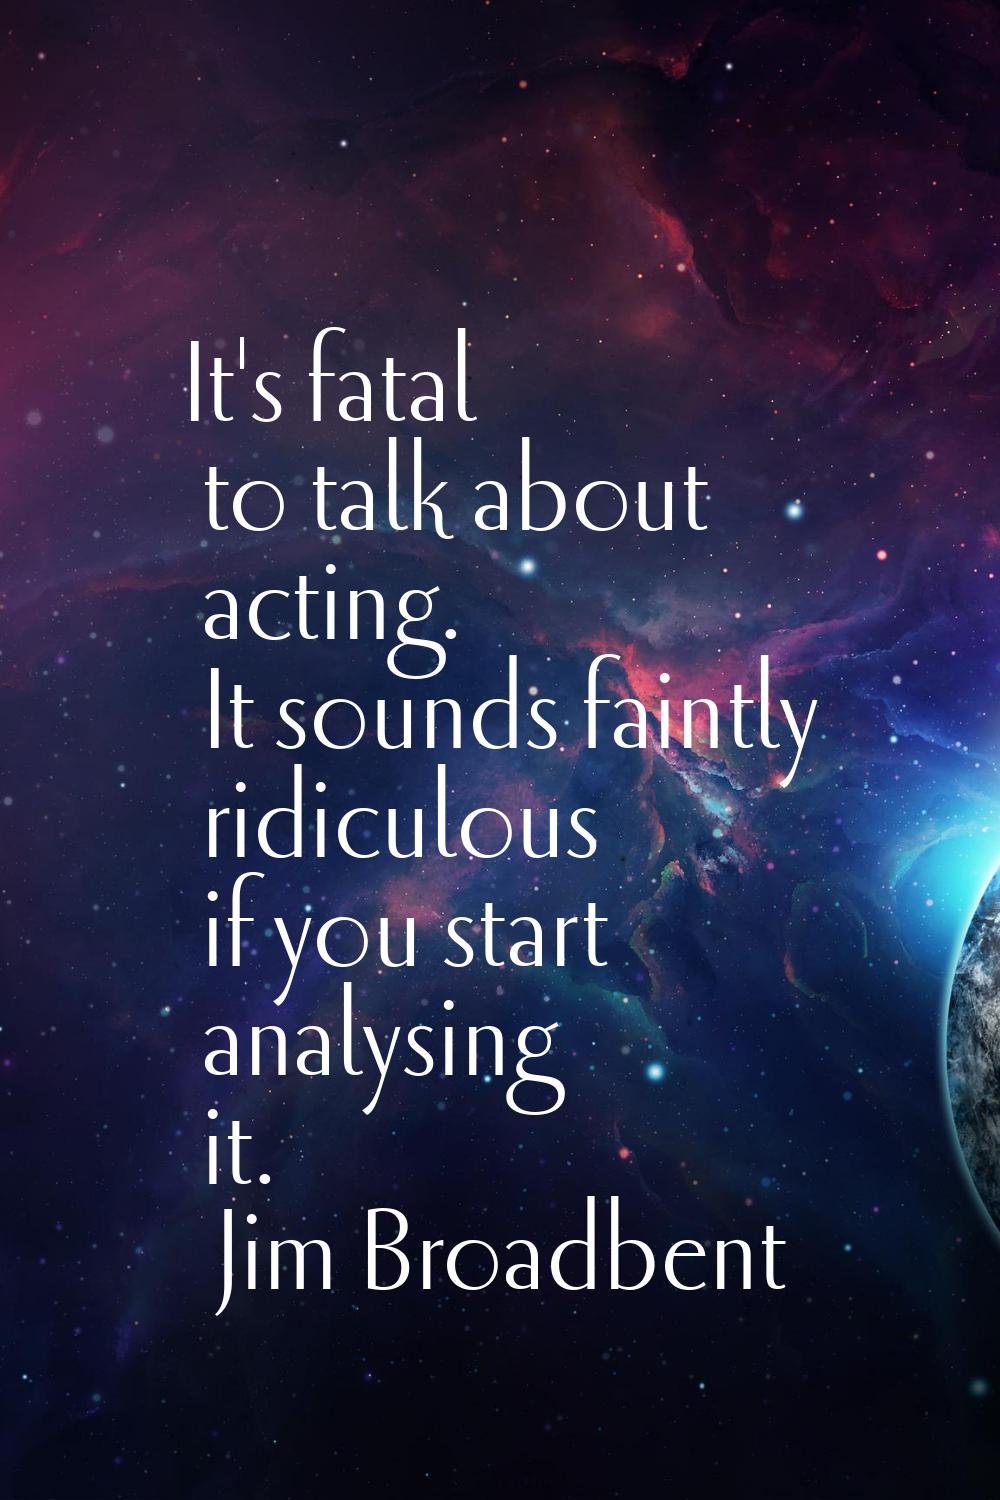 It's fatal to talk about acting. It sounds faintly ridiculous if you start analysing it.